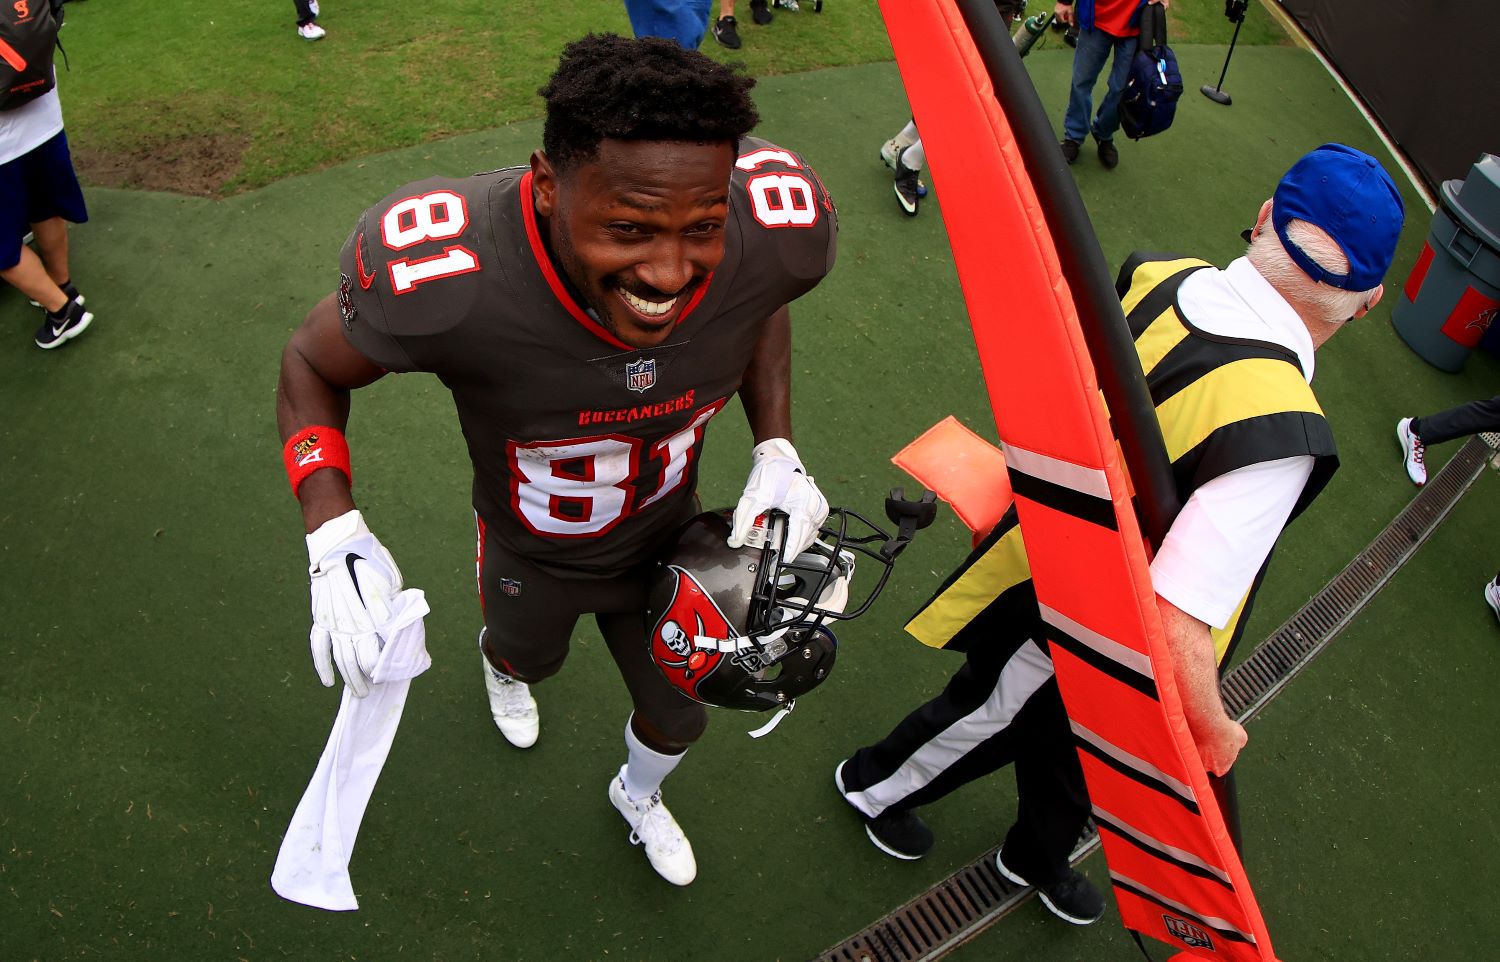 Antonio Brown missed the NFC championship game with a knee injury. But the Buccaneers WR may be able to get back in time for Super Bowl 55.